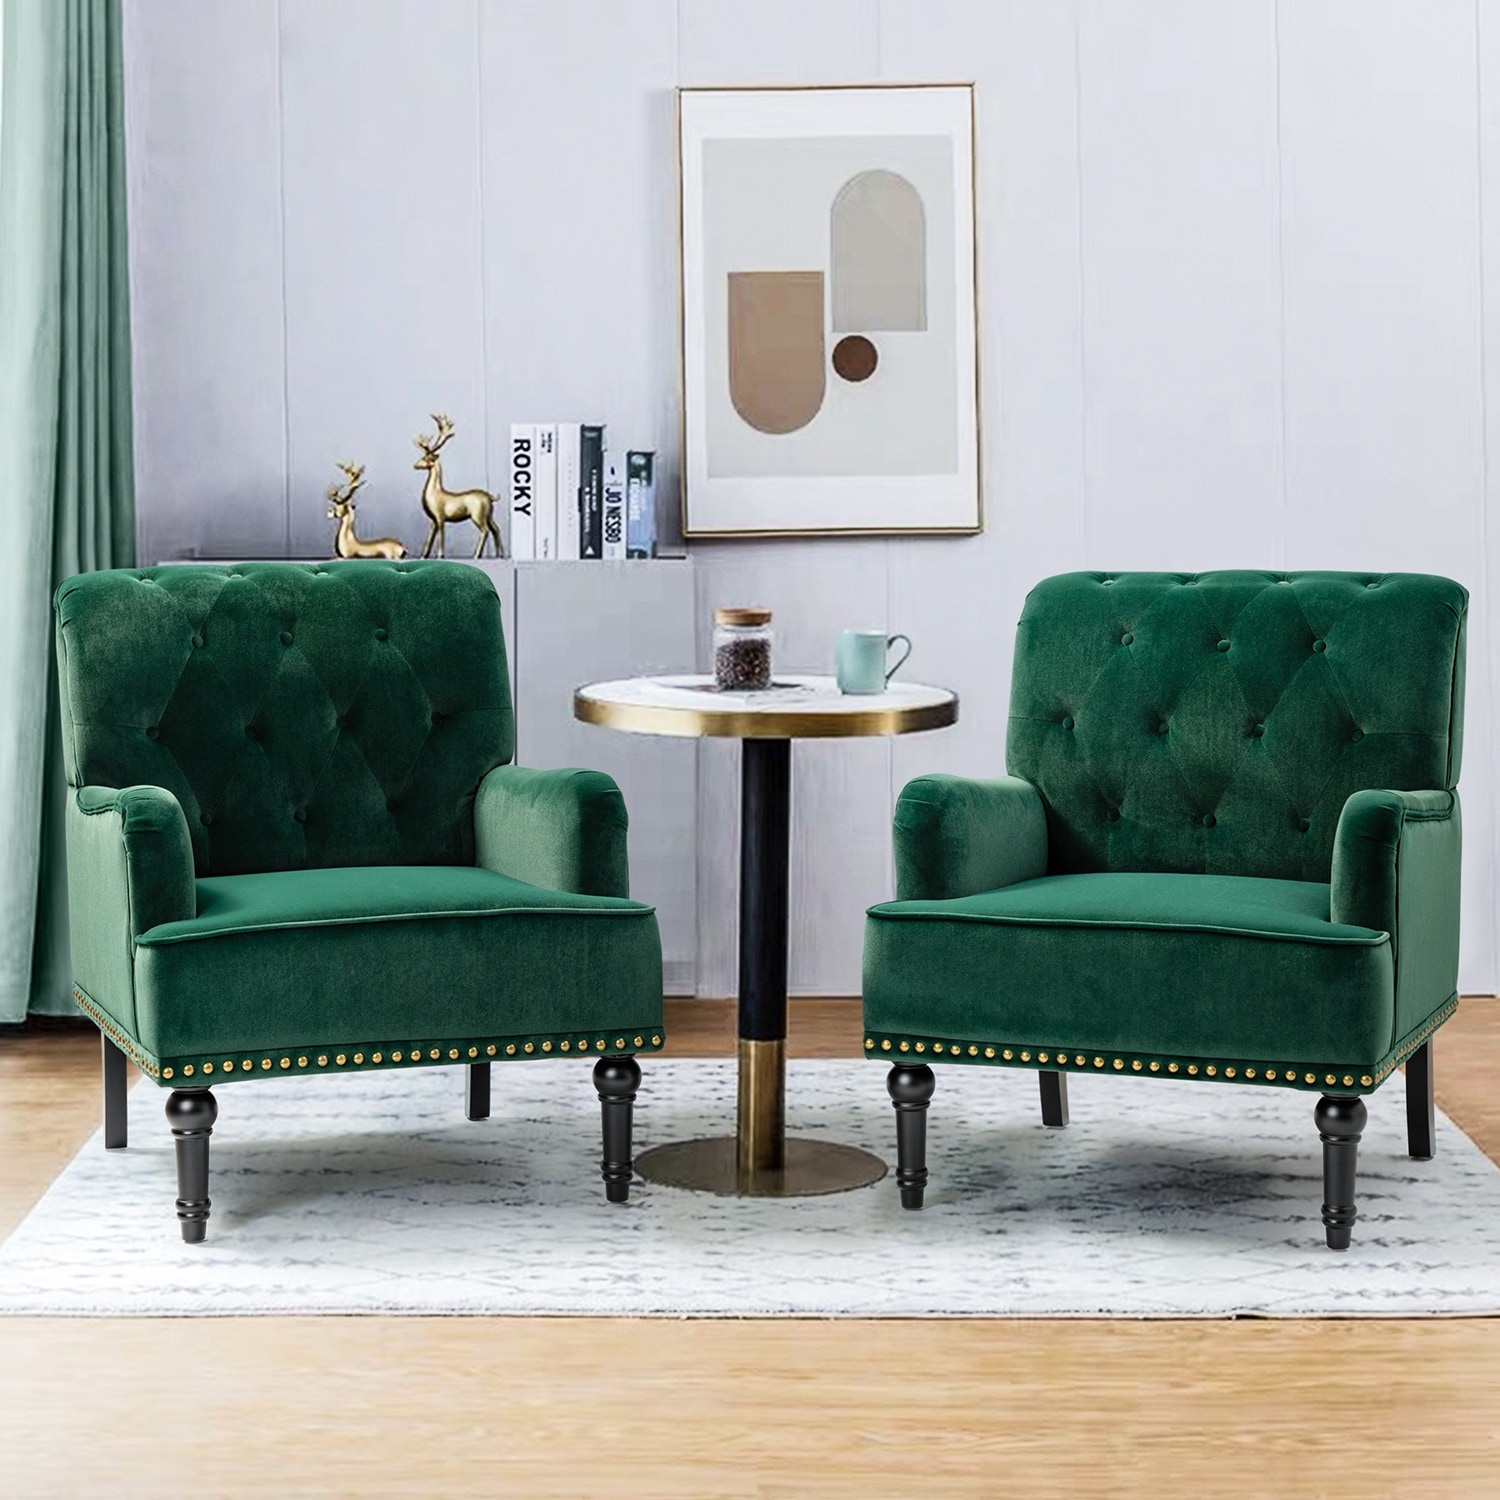 Geltrude Transitional Upholstered Club Chair with Tufted Back Set of 2 by HULALA HOME